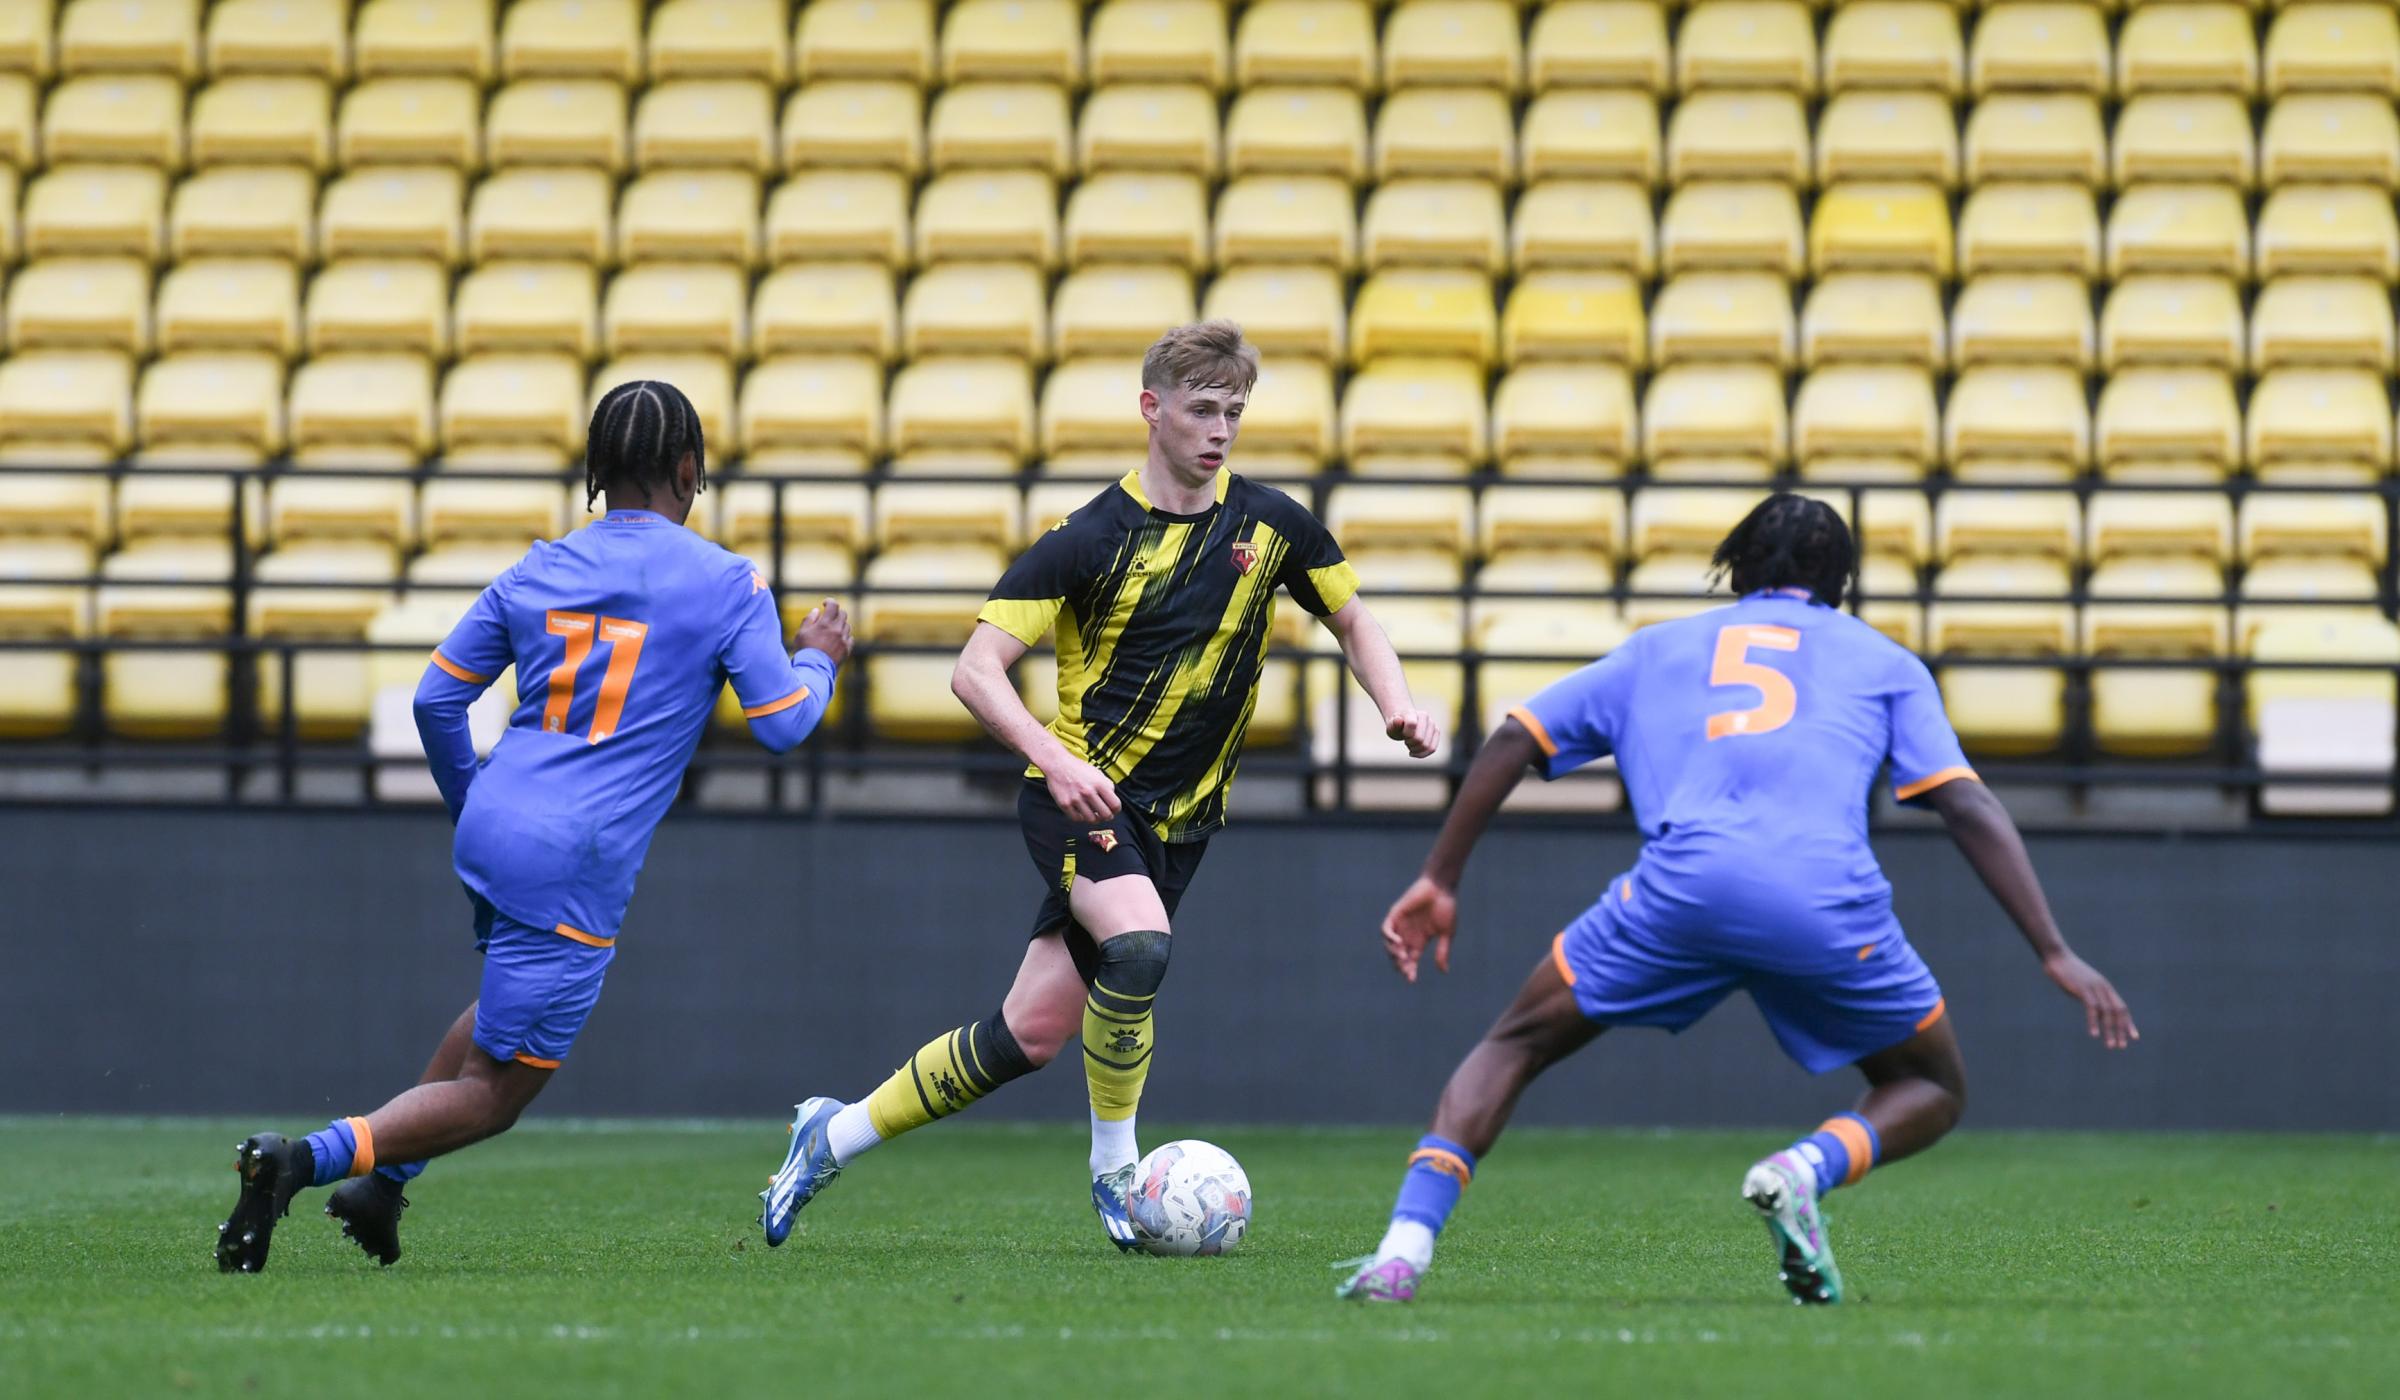 Another Watford Academy product progresses as Eames signs up